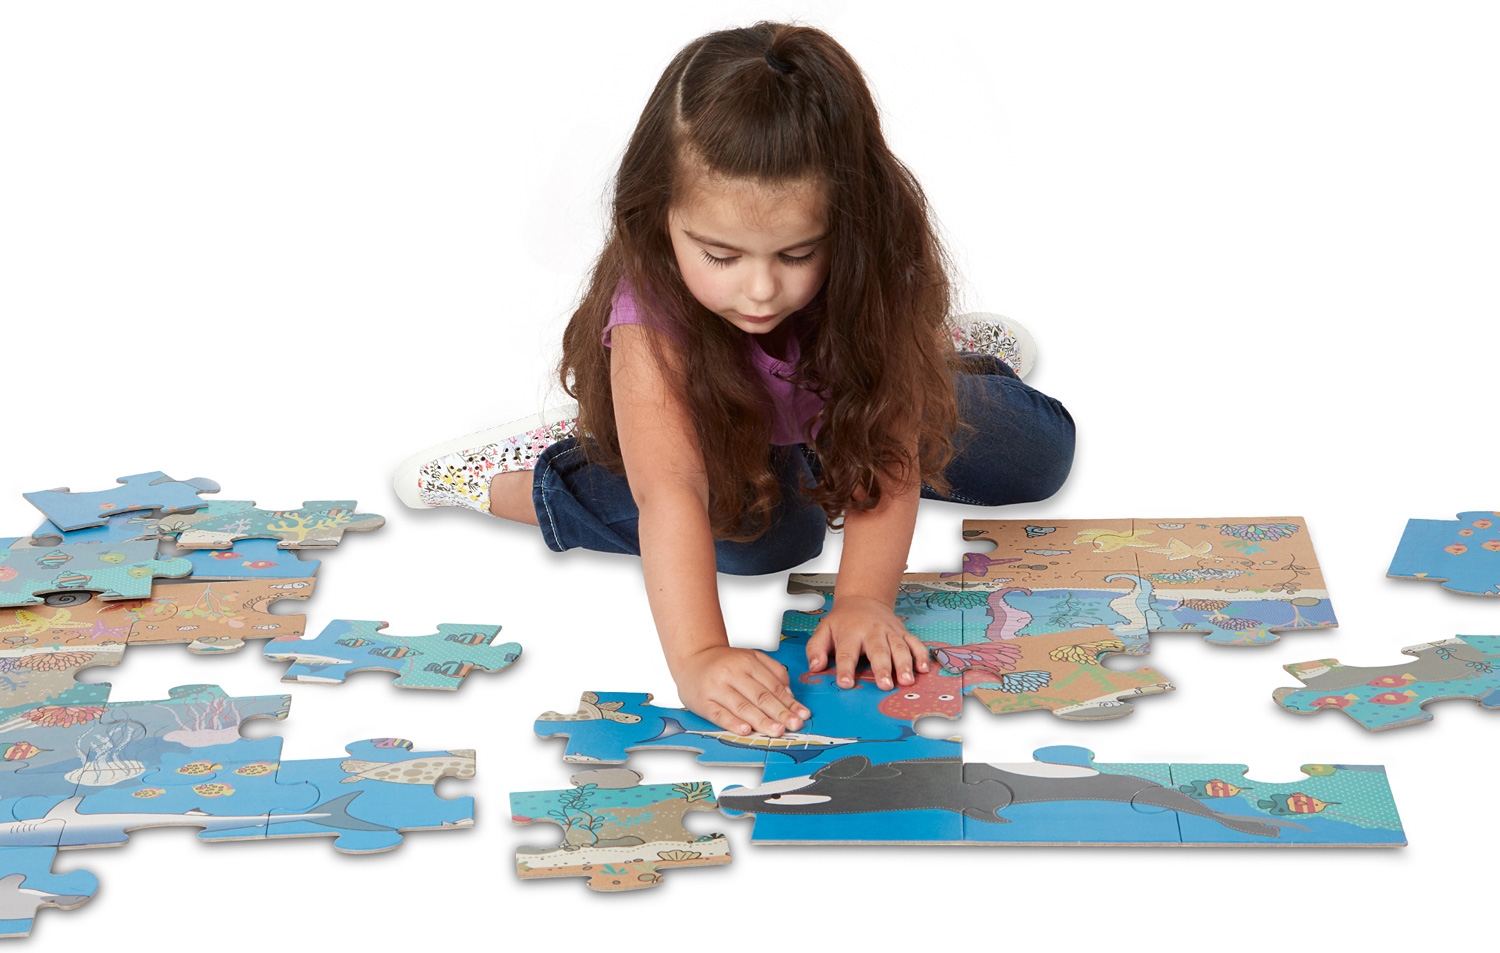 Under The Sea #31376 Melissa and Doug Natural Play Floor Puzzle 